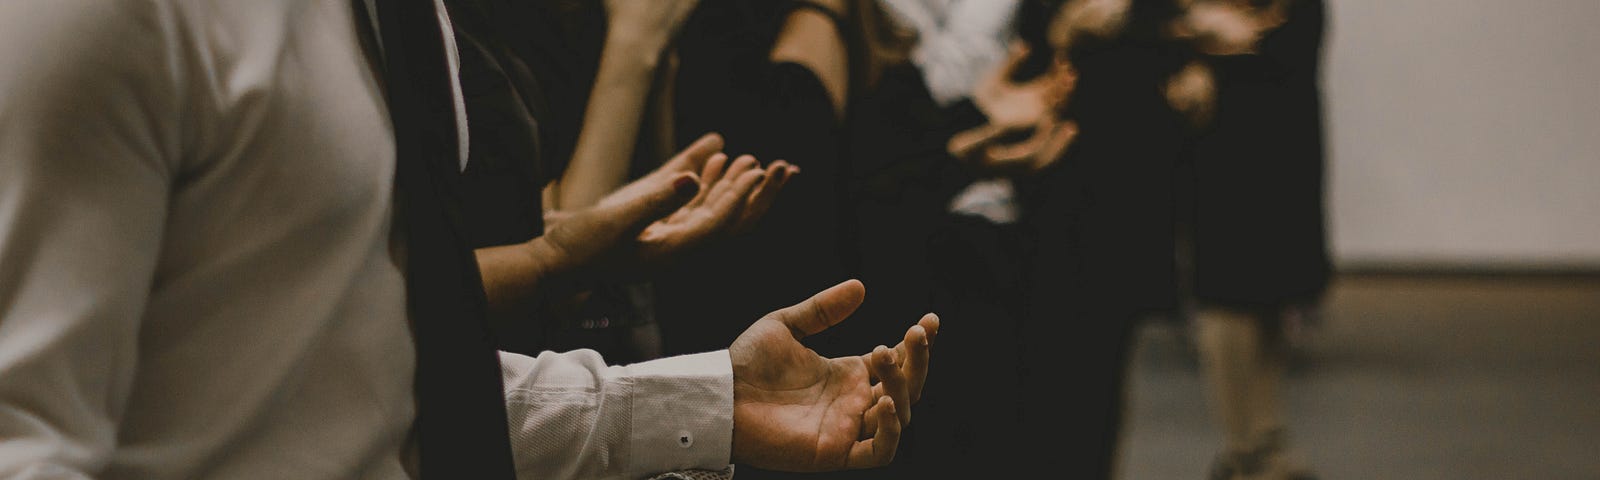 people praying with open hands